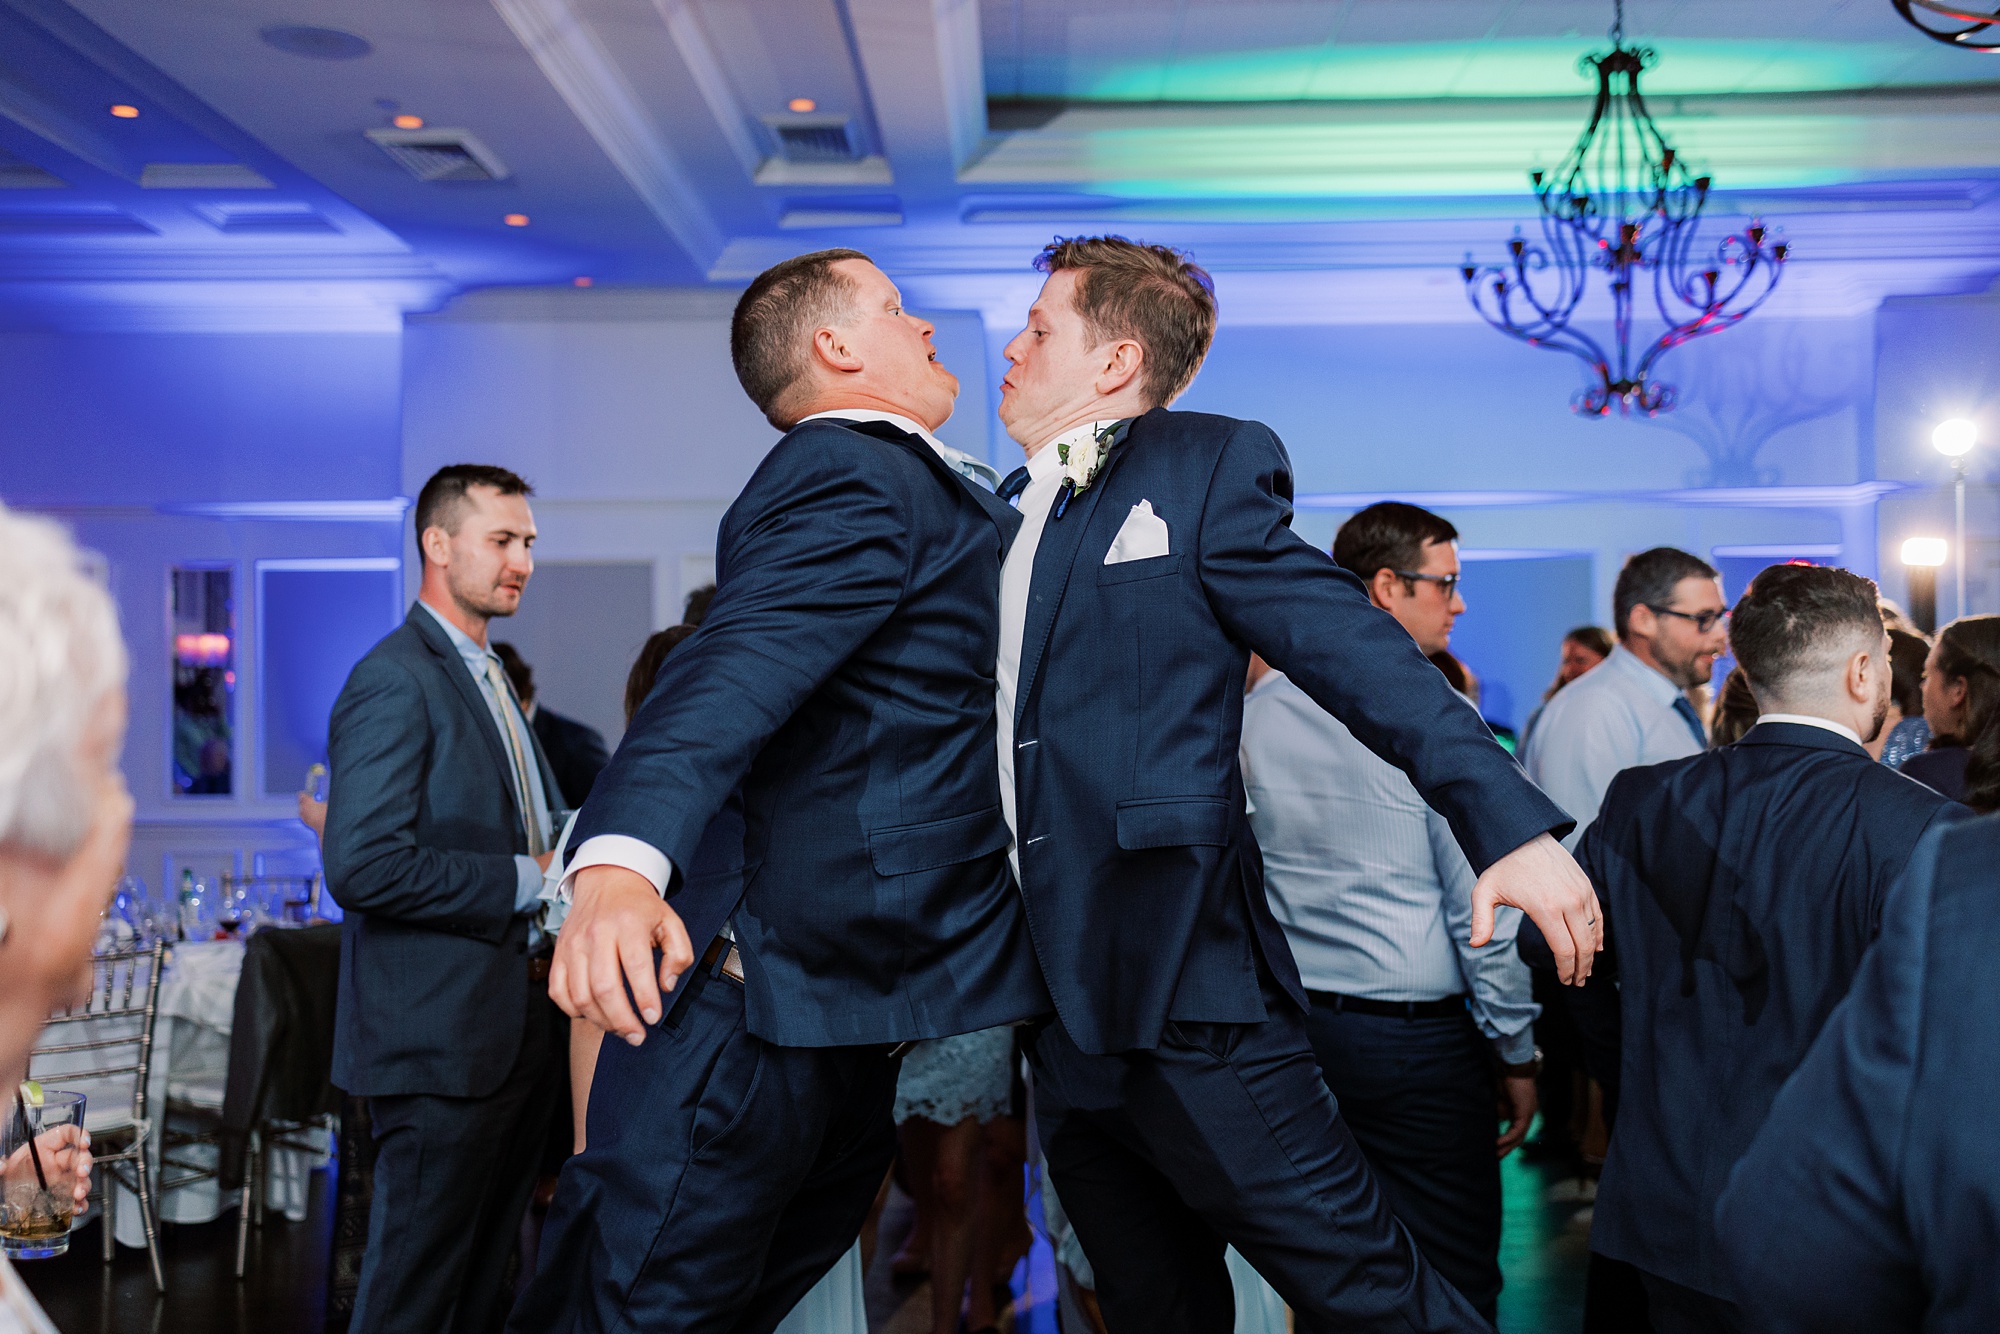 groom chest bumps with groomsman during Chester County PA wedding reception